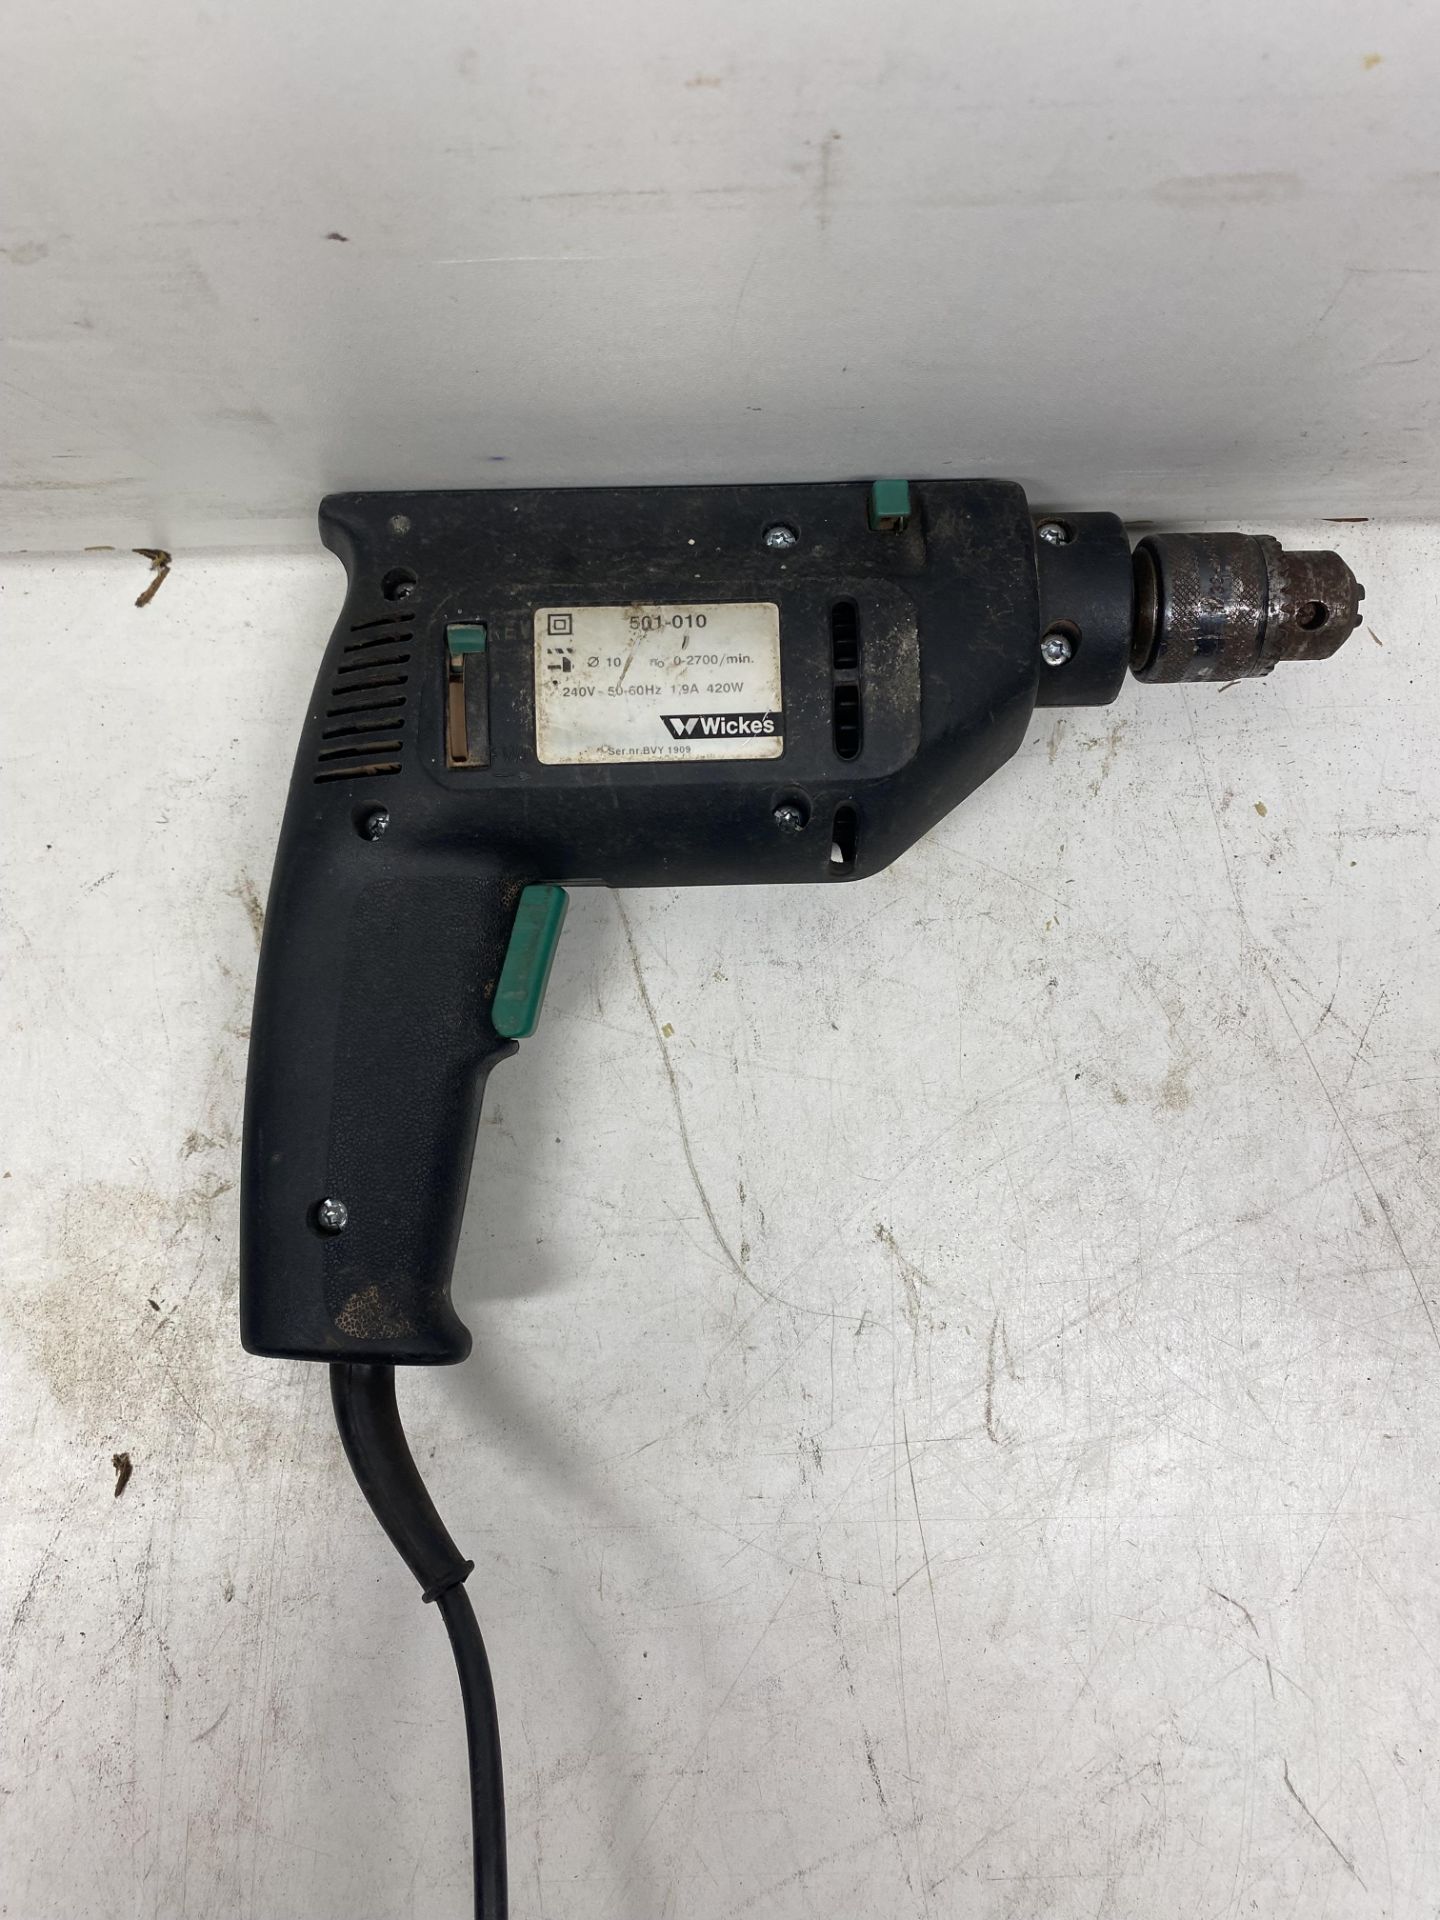 Wickes 501-010 420w Hammer Drill - Image 4 of 6